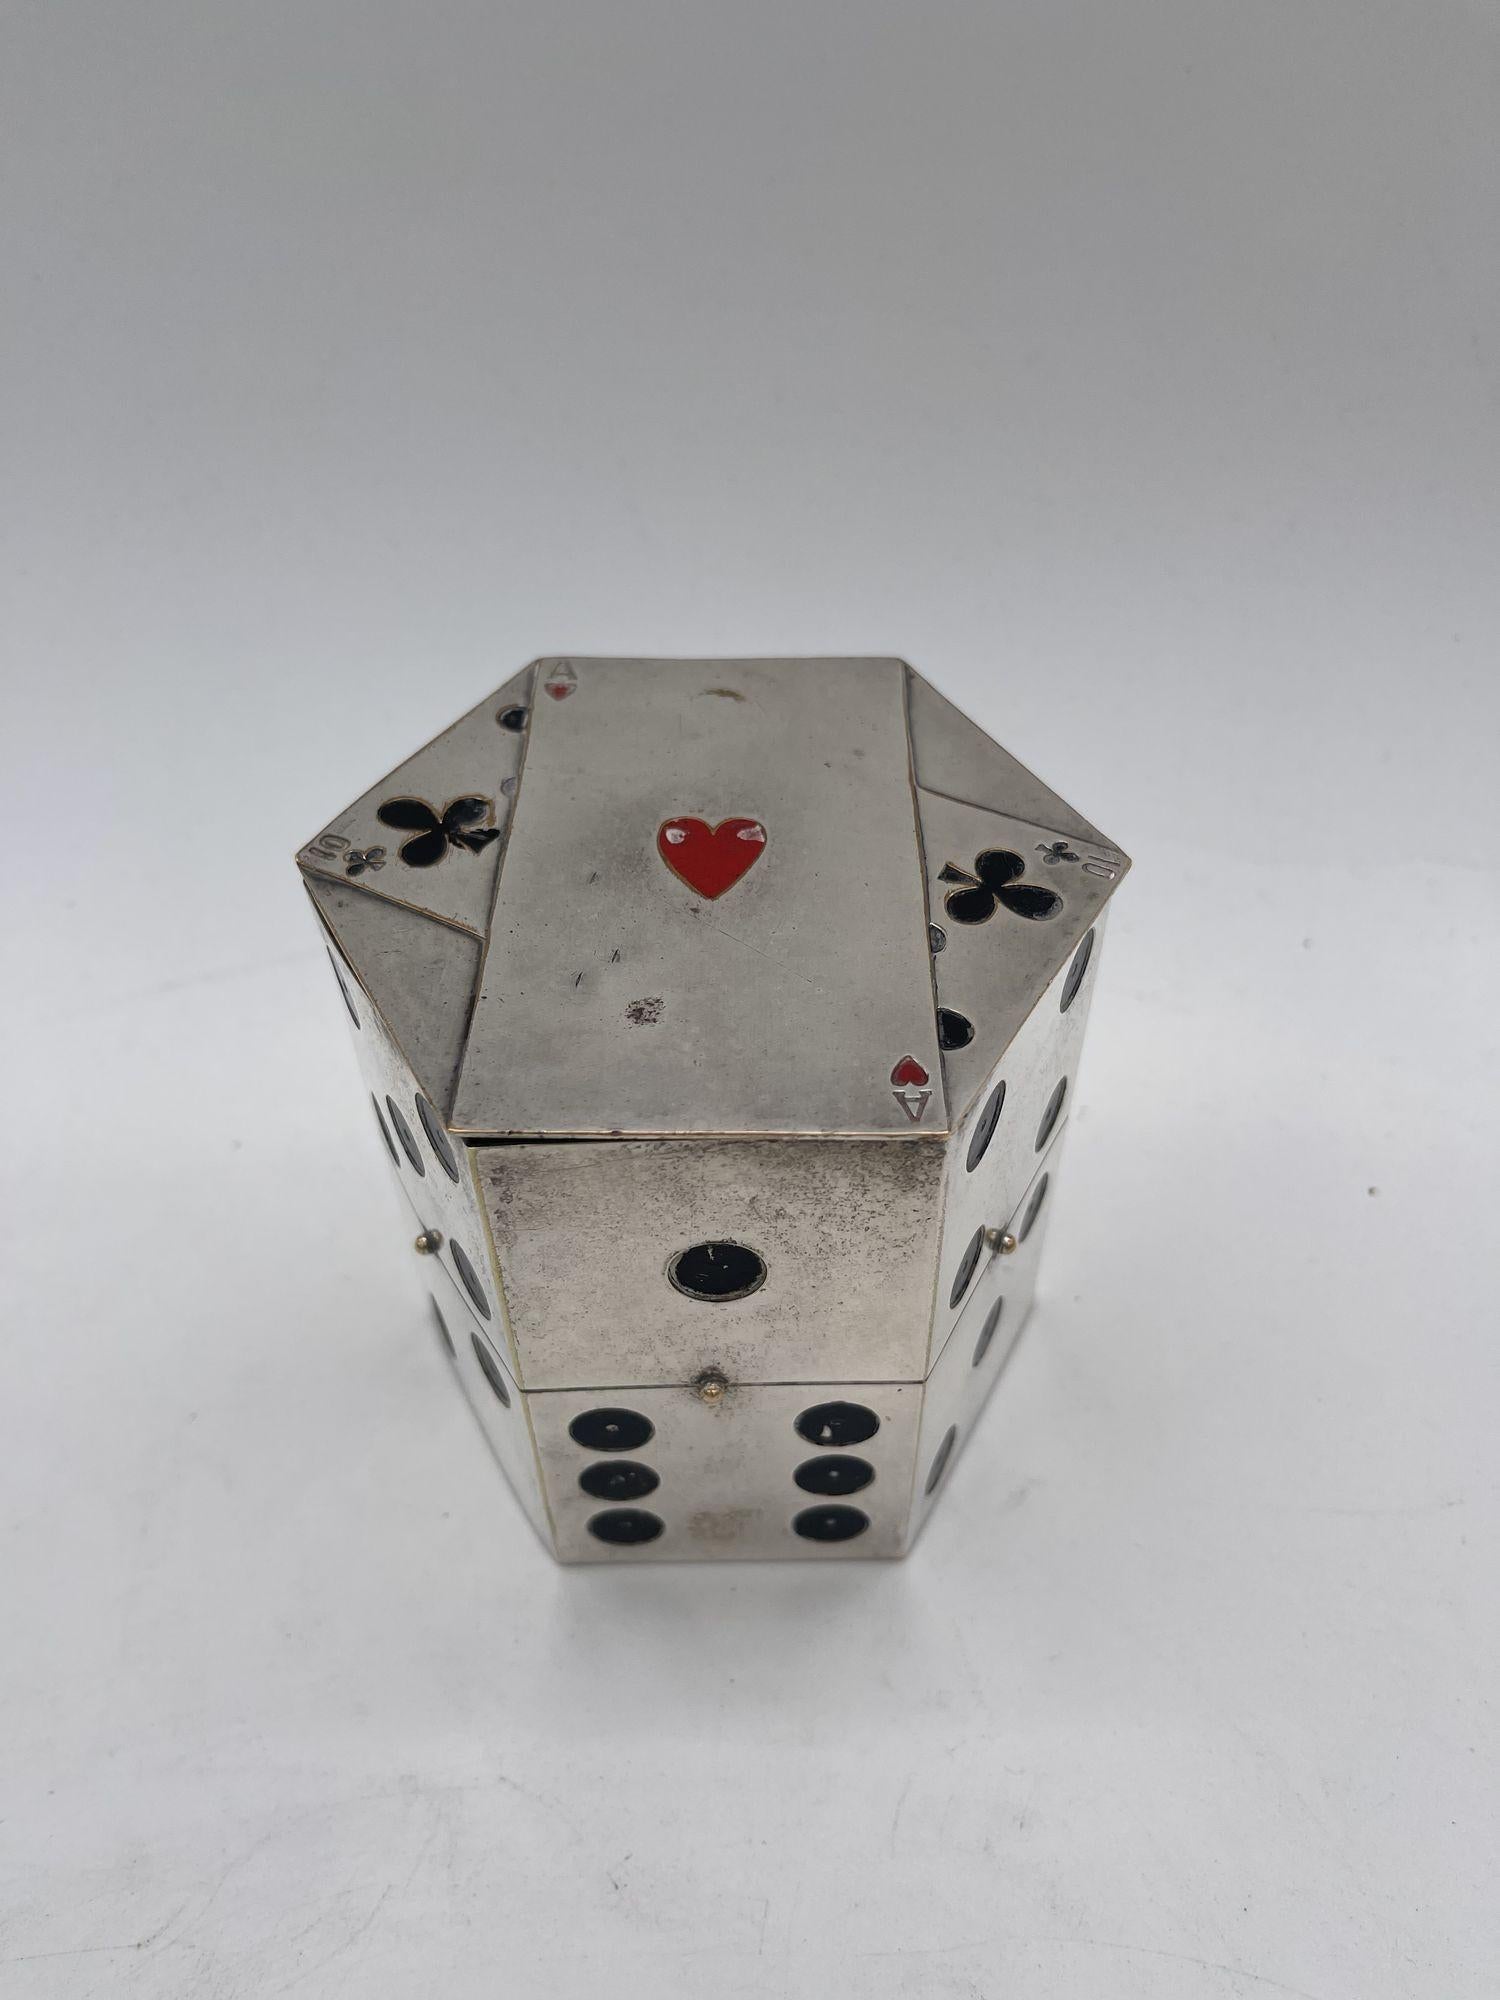 Very limited Jeweler-made Cigarette Dispenser hallmarked by the silversmith Legros Marius for Dunhill that resembles a stacked pair of dice with playing cards on top. A simple press of the center button seamlessly hidden in the center dot of the